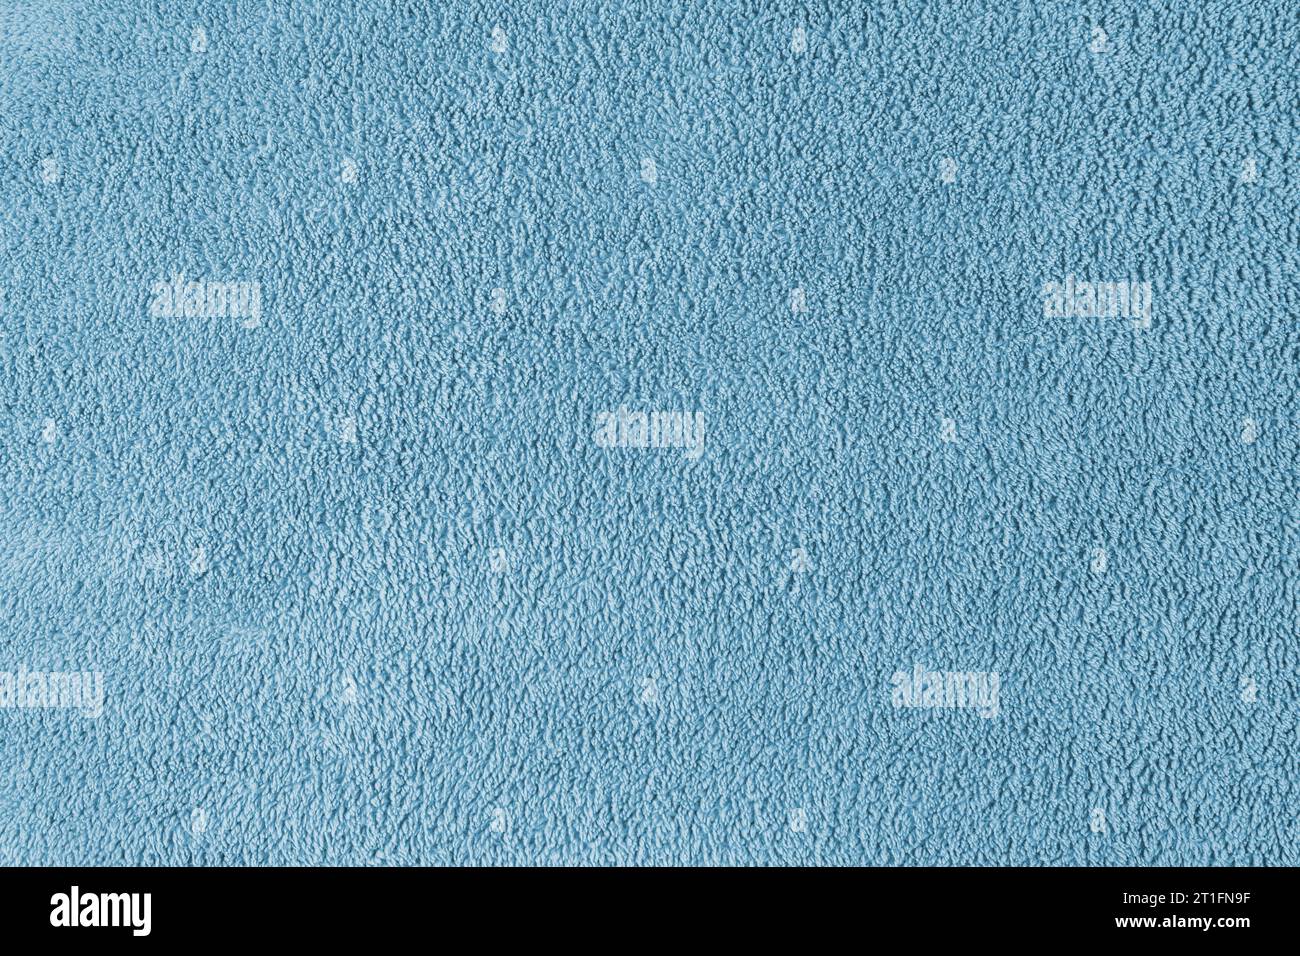 Terry cloth, blue towel texture background. Soft fluffy textile bath or beach towel material. Top view, close up. Stock Photo